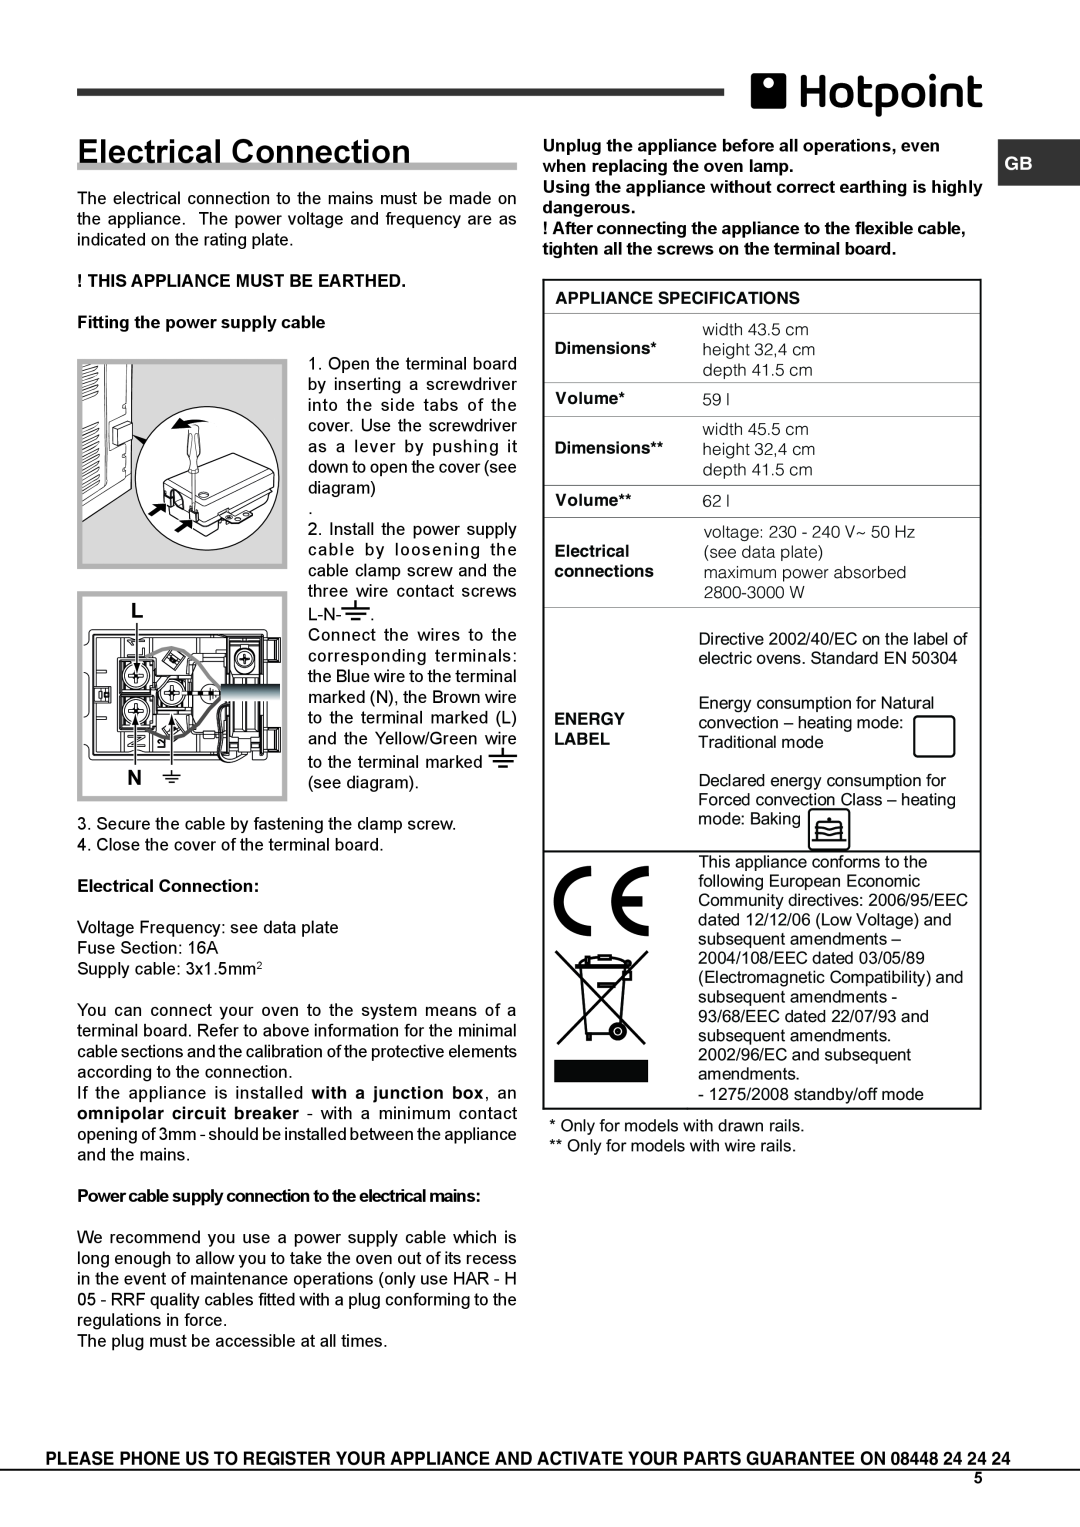 Hotpoint SH89PX S, KSOS 89 PX S manual Electrical Connection 